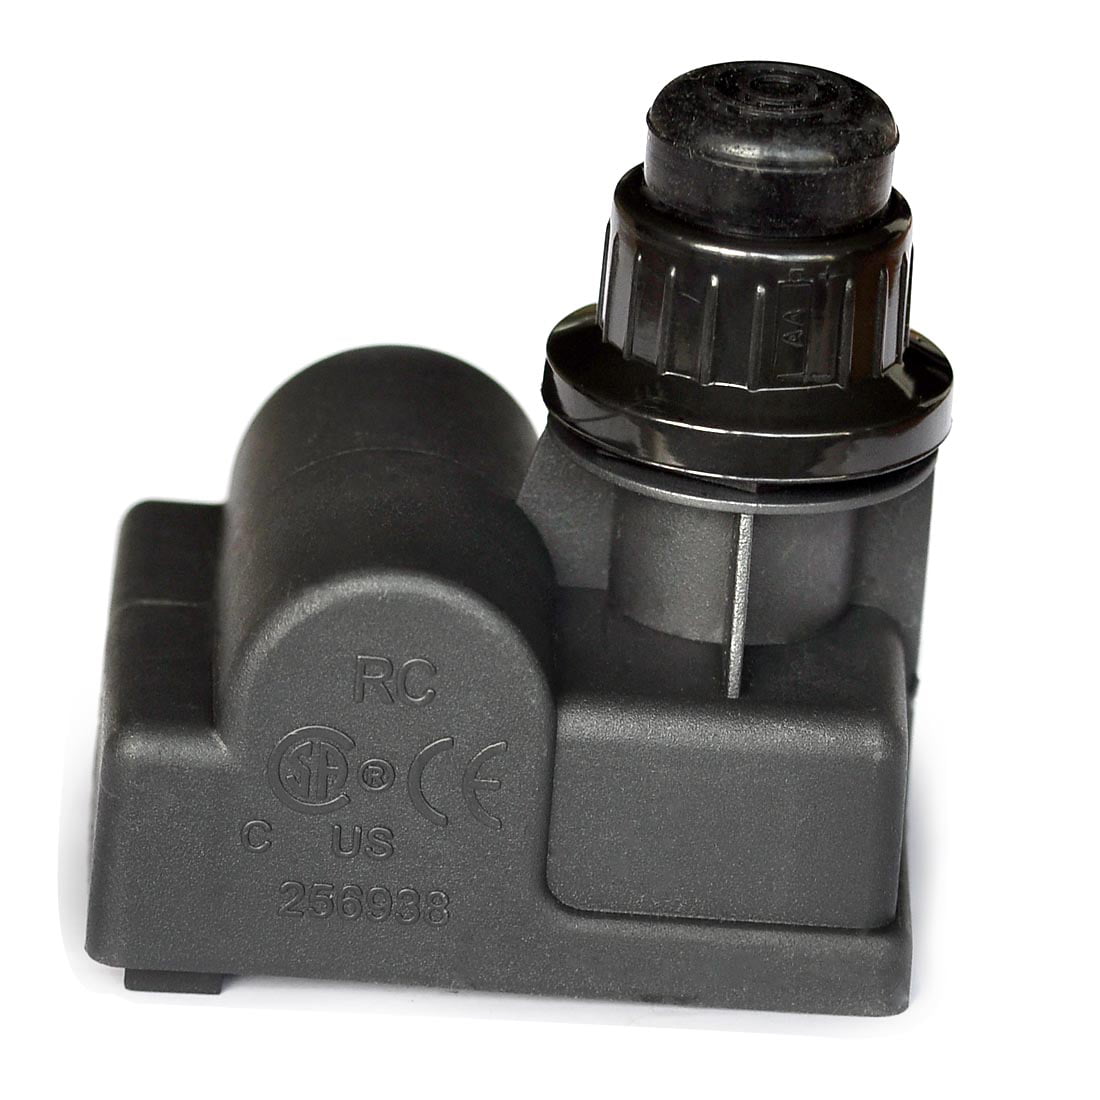 BBQ 03310 Spark Generator 1 Outlet AAA Battery Button Ignitor Igniter Gas Grill